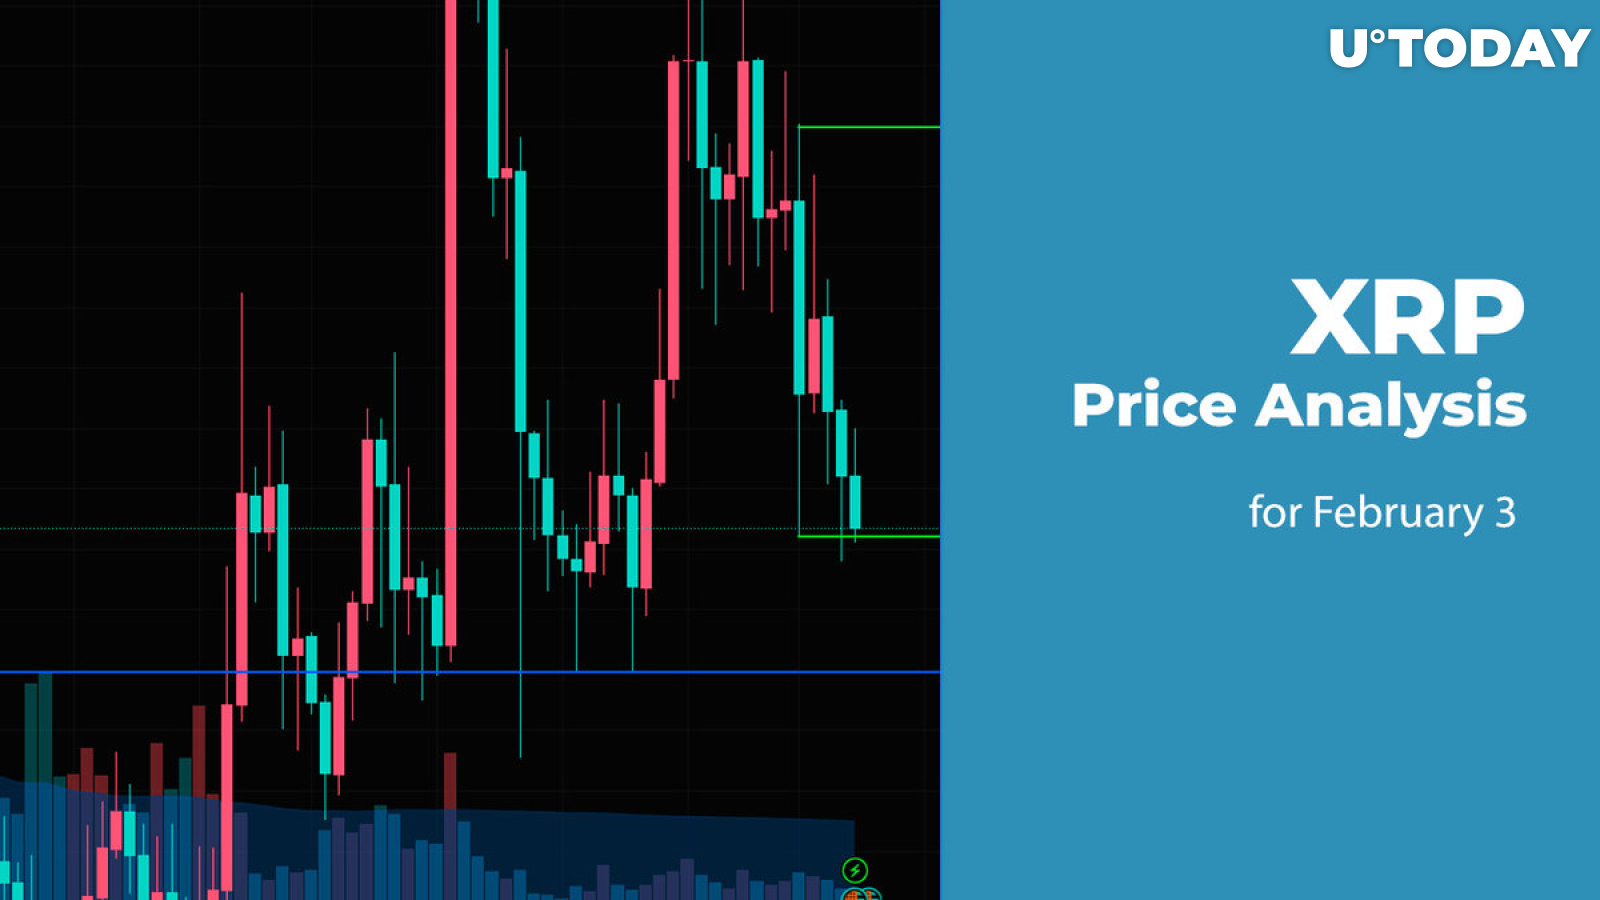 XRP Price Analysis for February 3